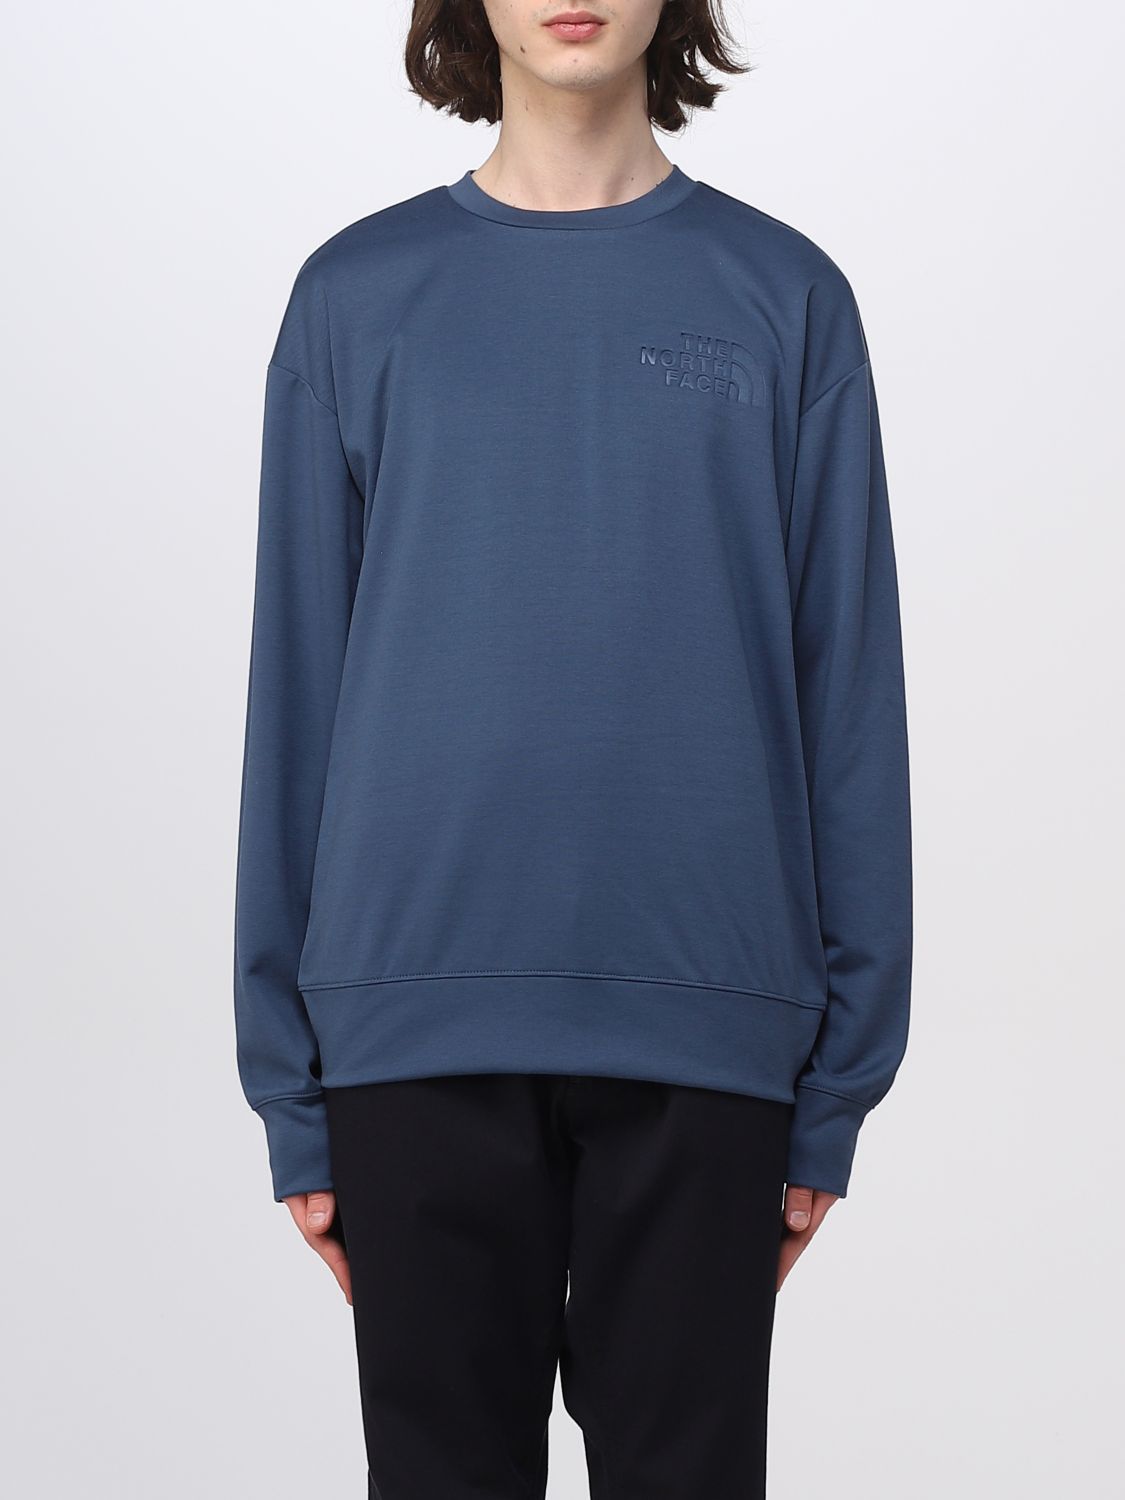 THE NORTH FACE: sweatshirt for man - Blue | The North Face sweatshirt ...